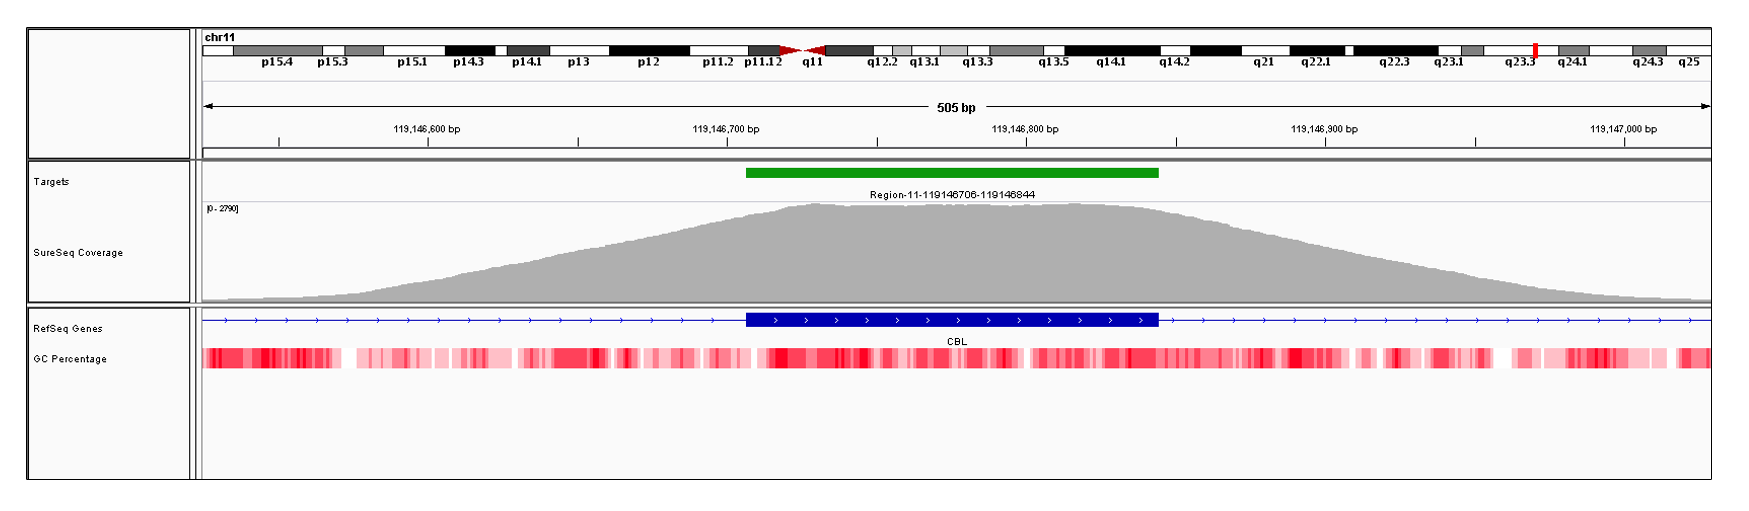 CBL Exon 6 (hg19 chr11:119146707-119146844). Depth of coverage per base (grey). Targeted region (green). Gene coding region as defined by RefSeq (blue). GC percentage (red). Image